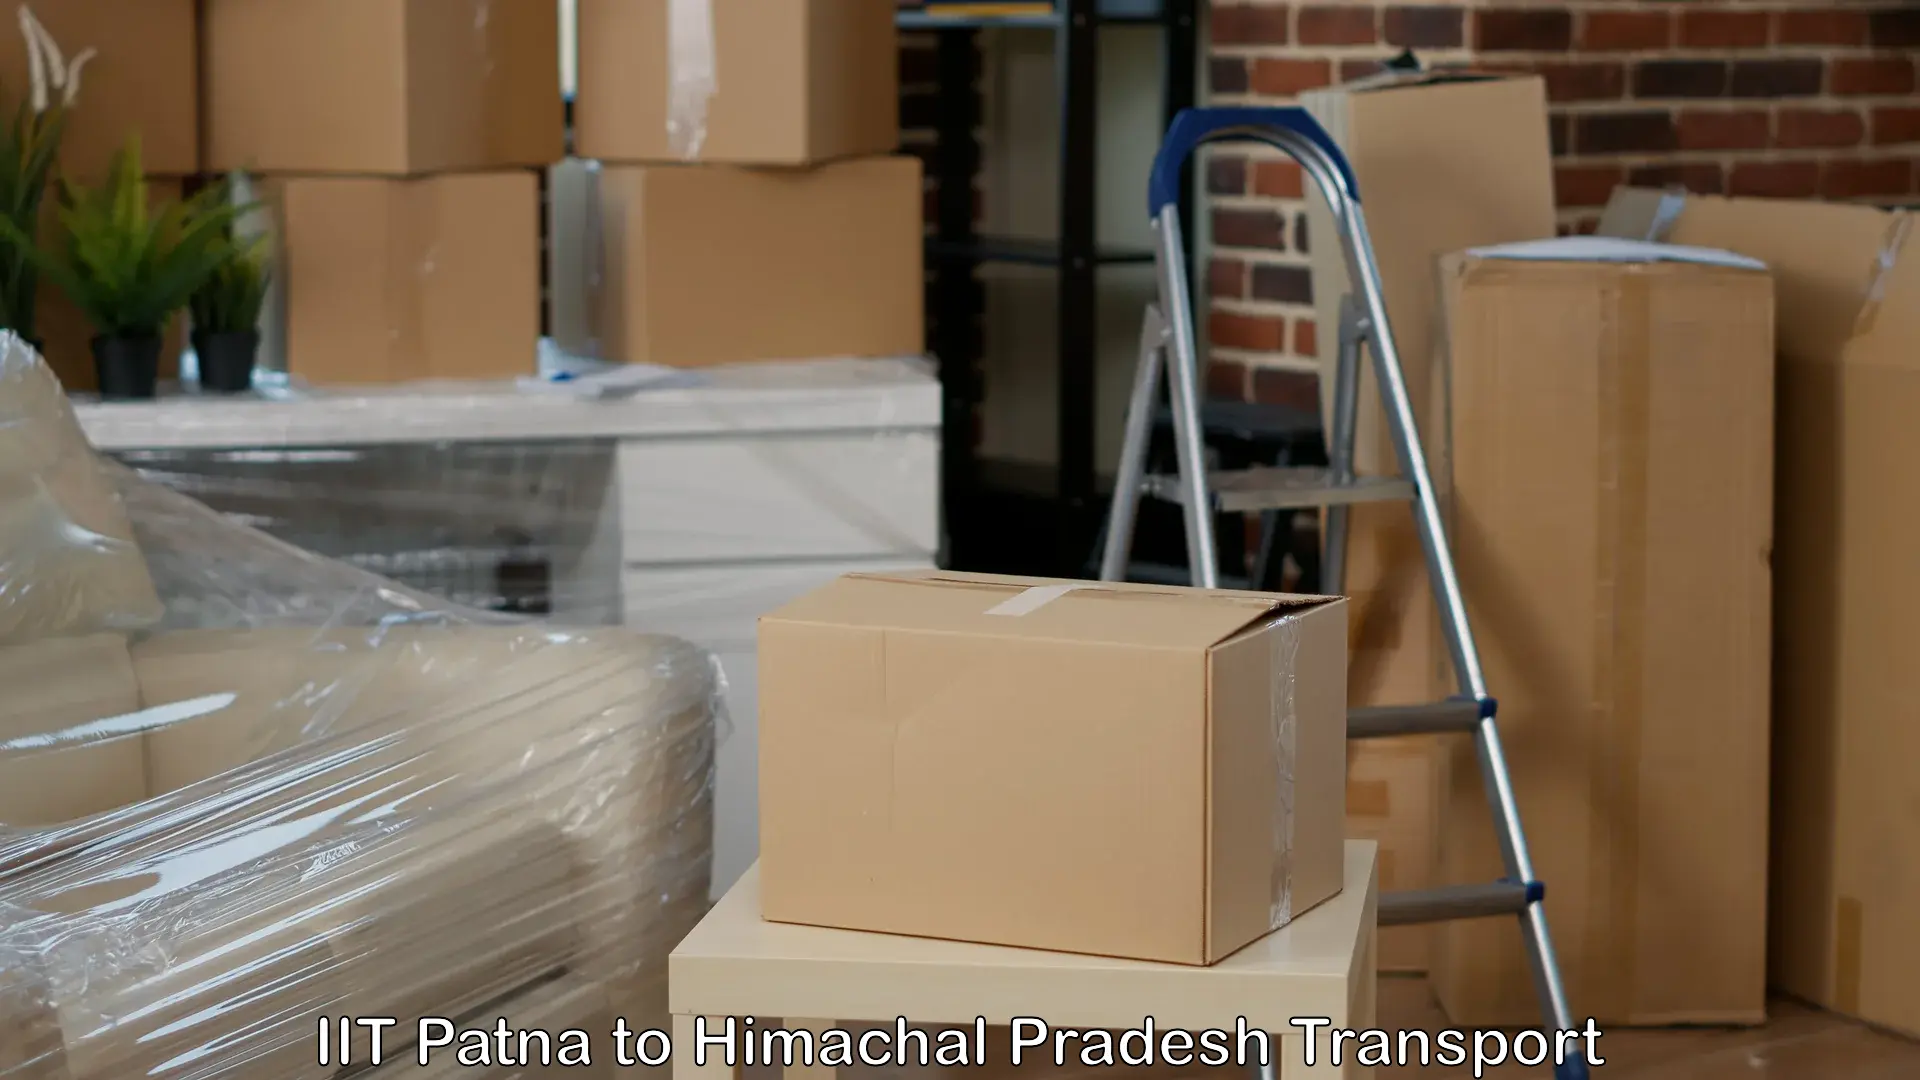 Furniture transport service in IIT Patna to Kandaghat